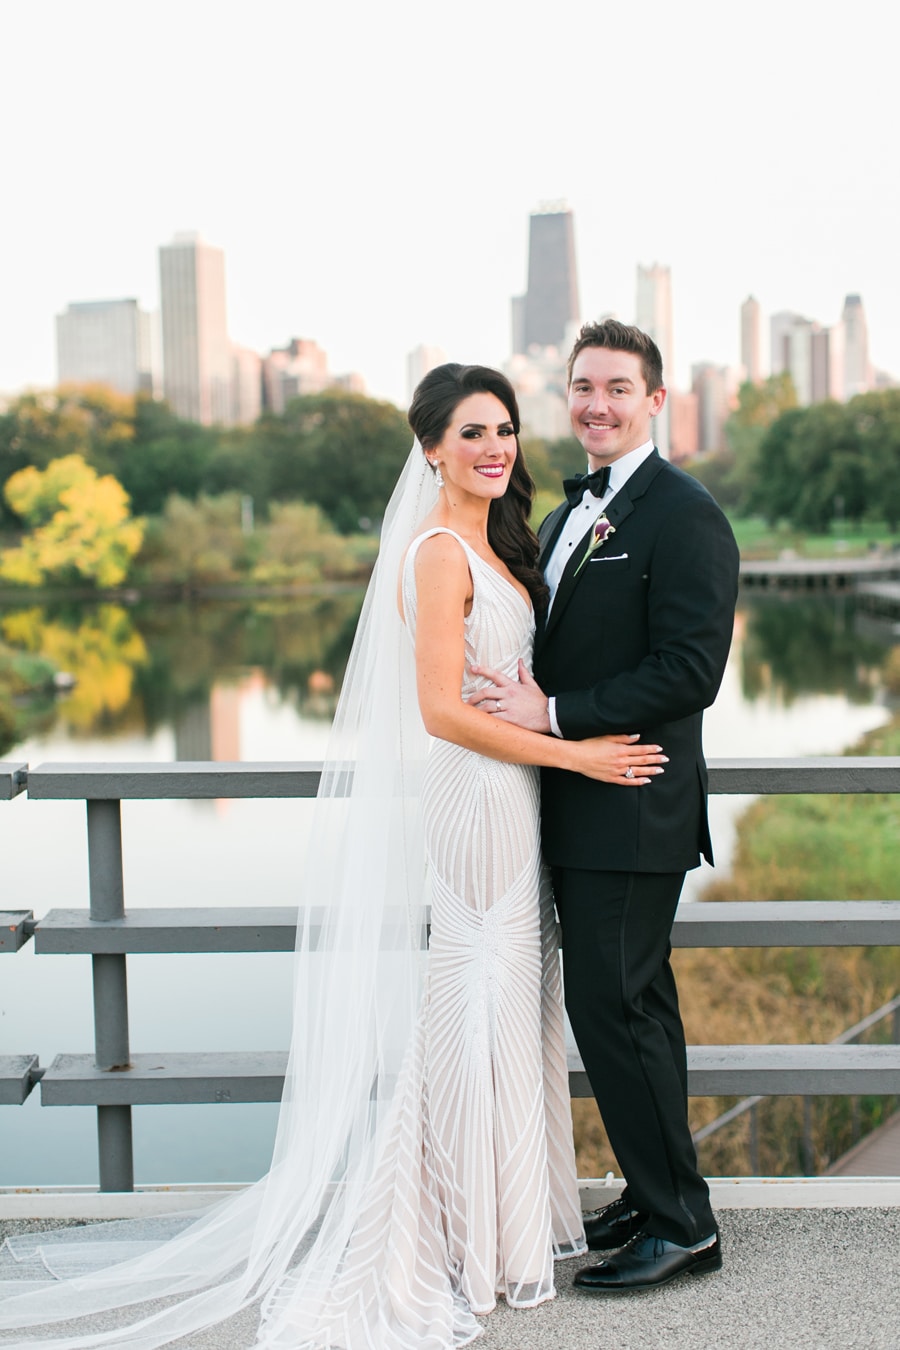 A glamorous wedding at Cafe Brauer in Chicago.